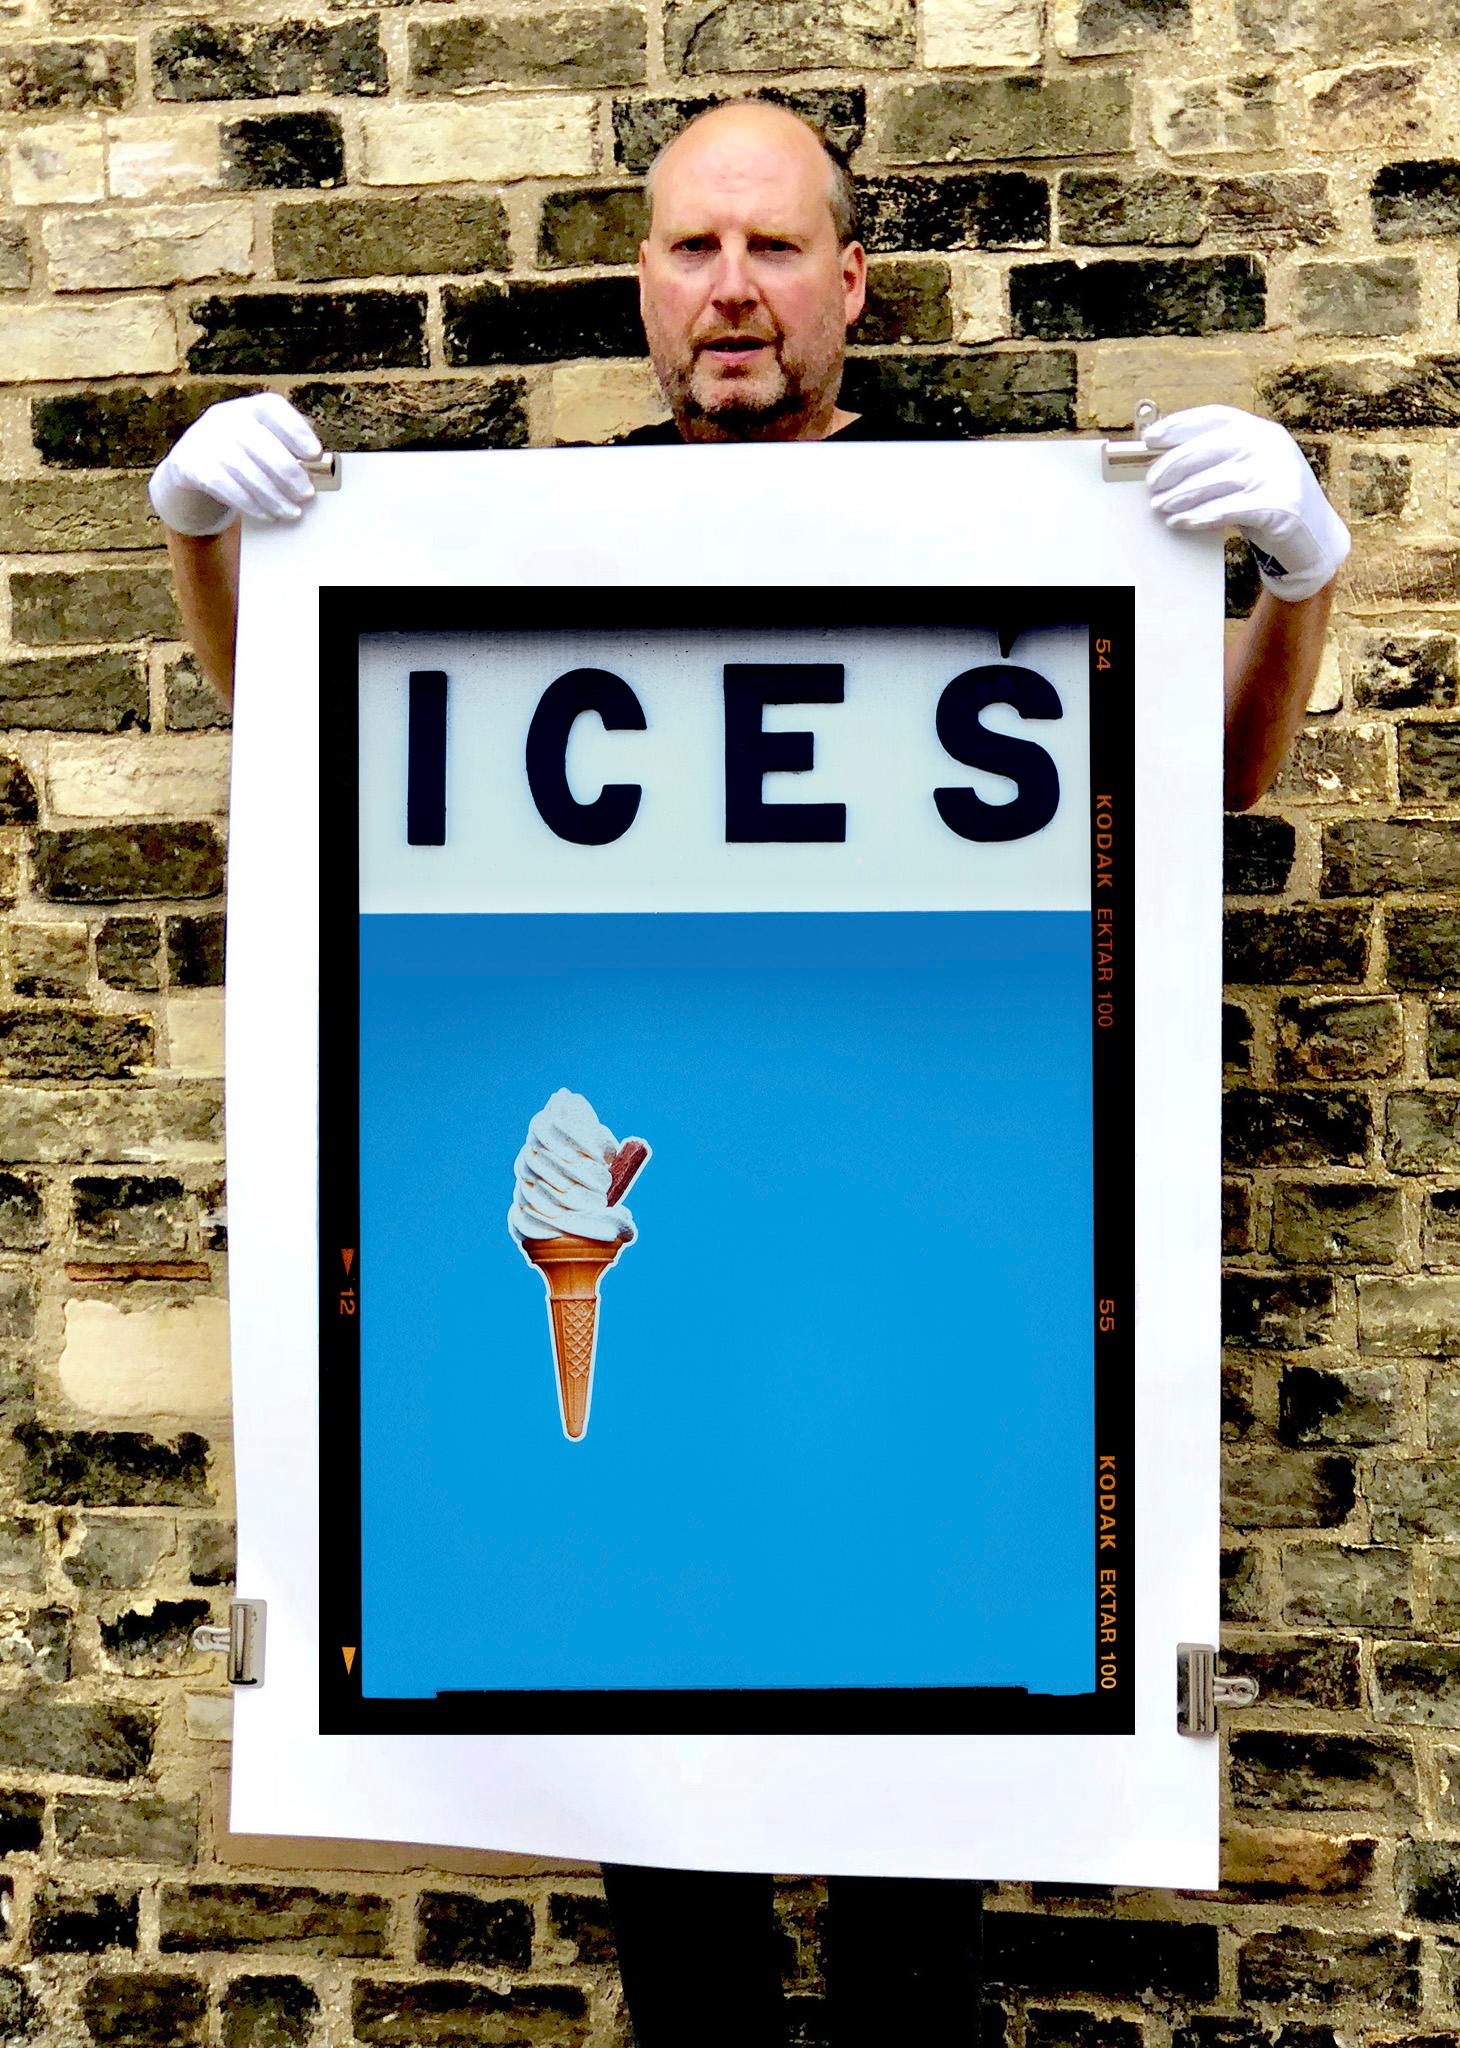 ICES (Sky Blue), Bexhill-on-Sea - British seaside color photography - Photograph by Richard Heeps